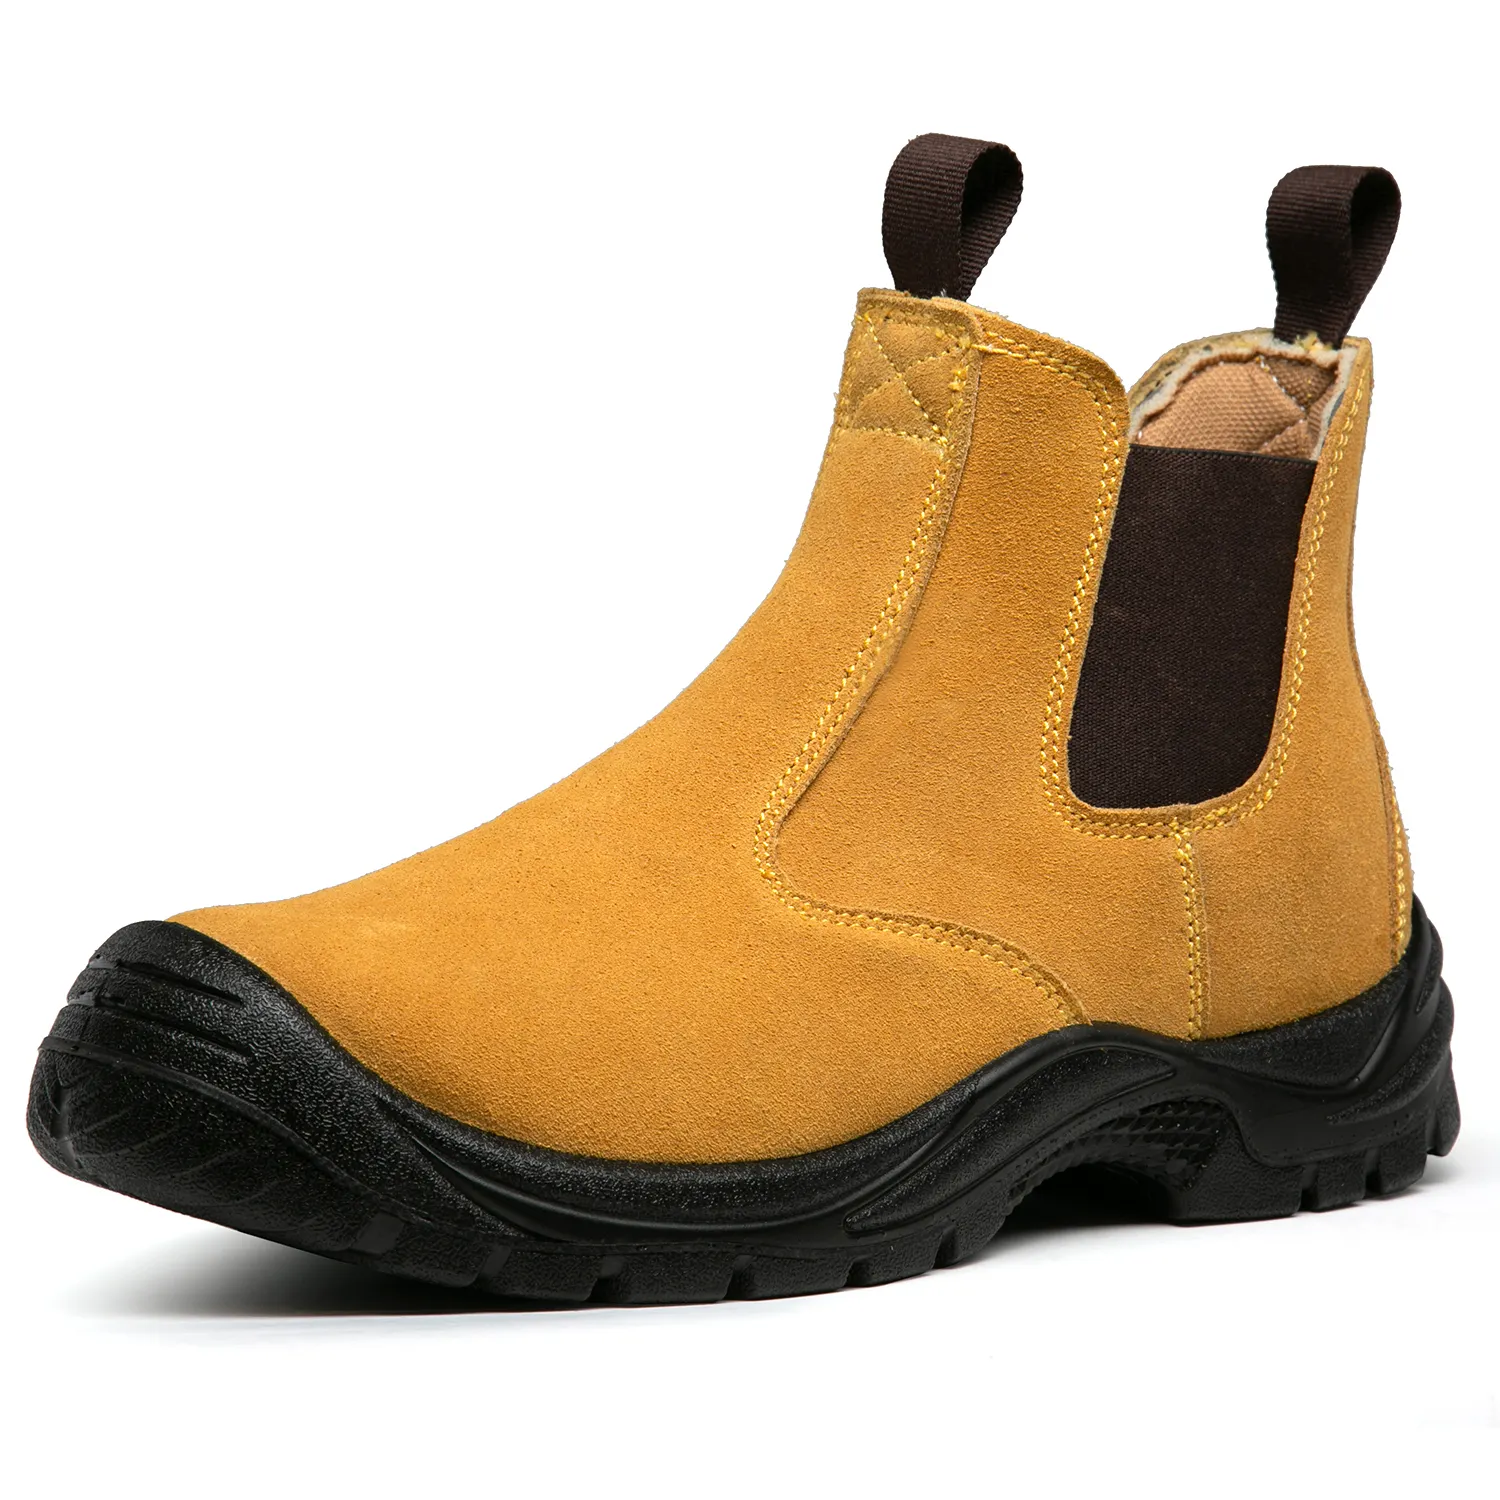 Middle-cut latest version safety shoes waterproof work boot shoes footwear yellow